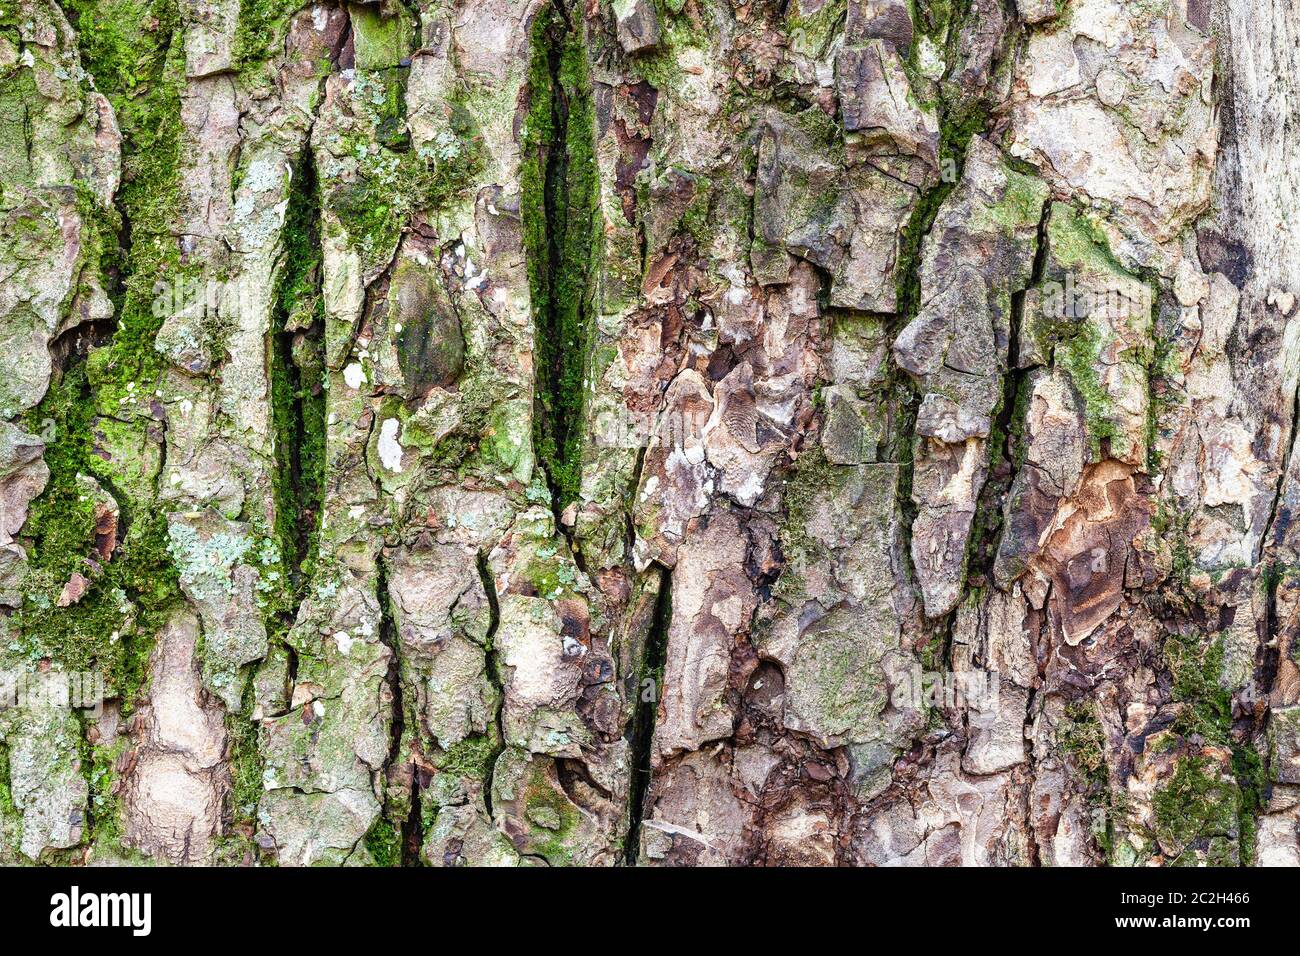 natural texture - uneven bark on old trunk of elm tree (ulmus laevis) close up Stock Photo